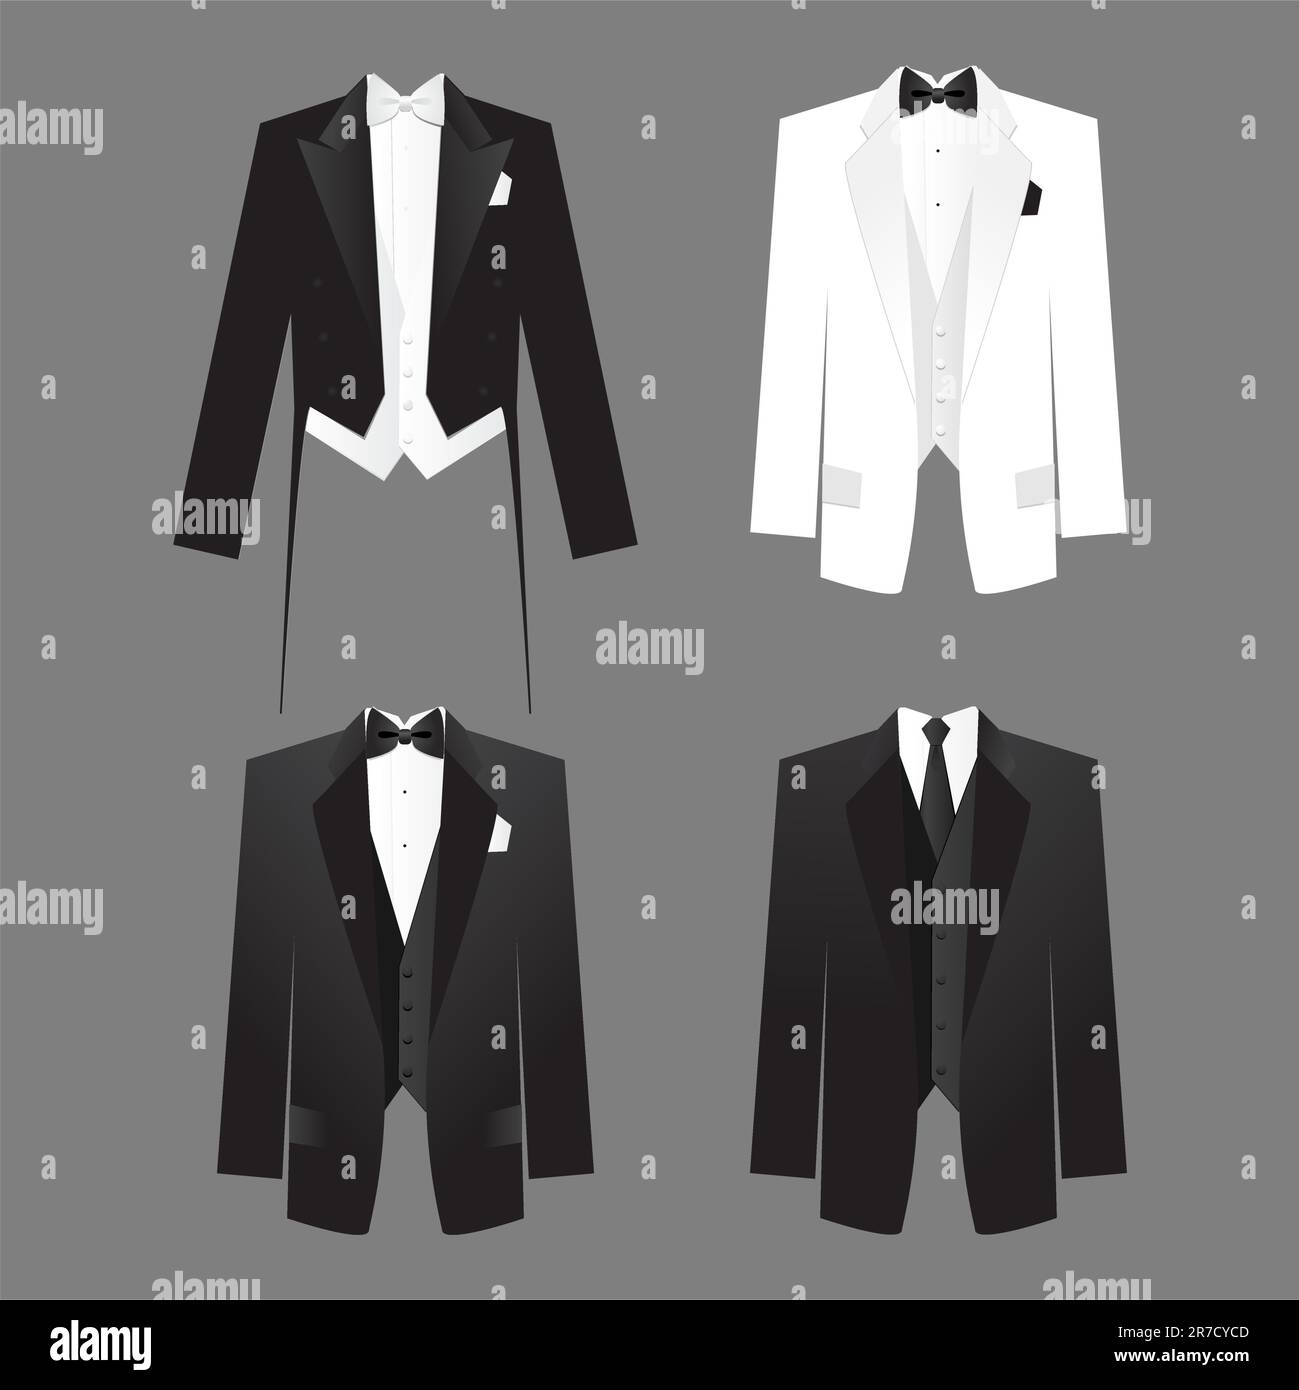 Dress code for men - male costume: tails, tuxedo, dress suit.  Options along for the soiree, presentations, business meetings, parties, etc. Stock Vector